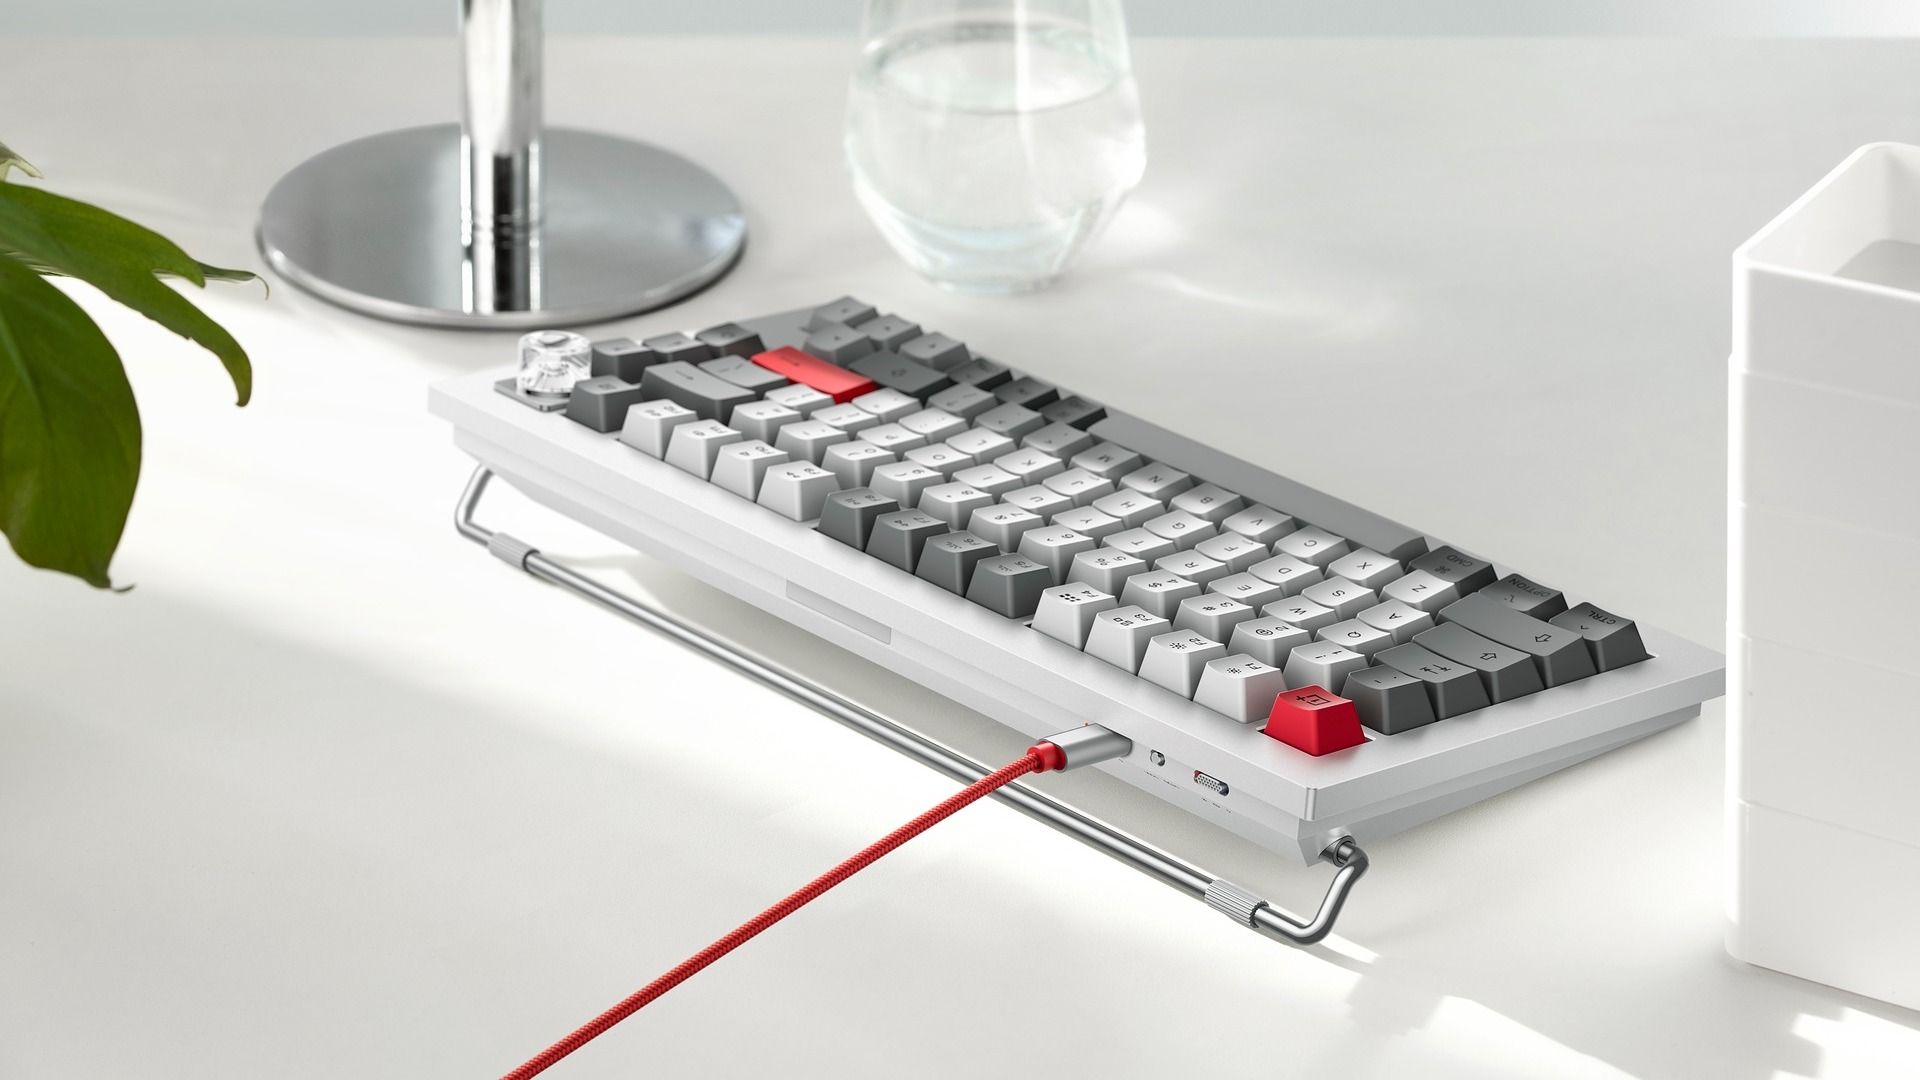 You Can Now Buy the First OnePlus Mechanical Keyboard